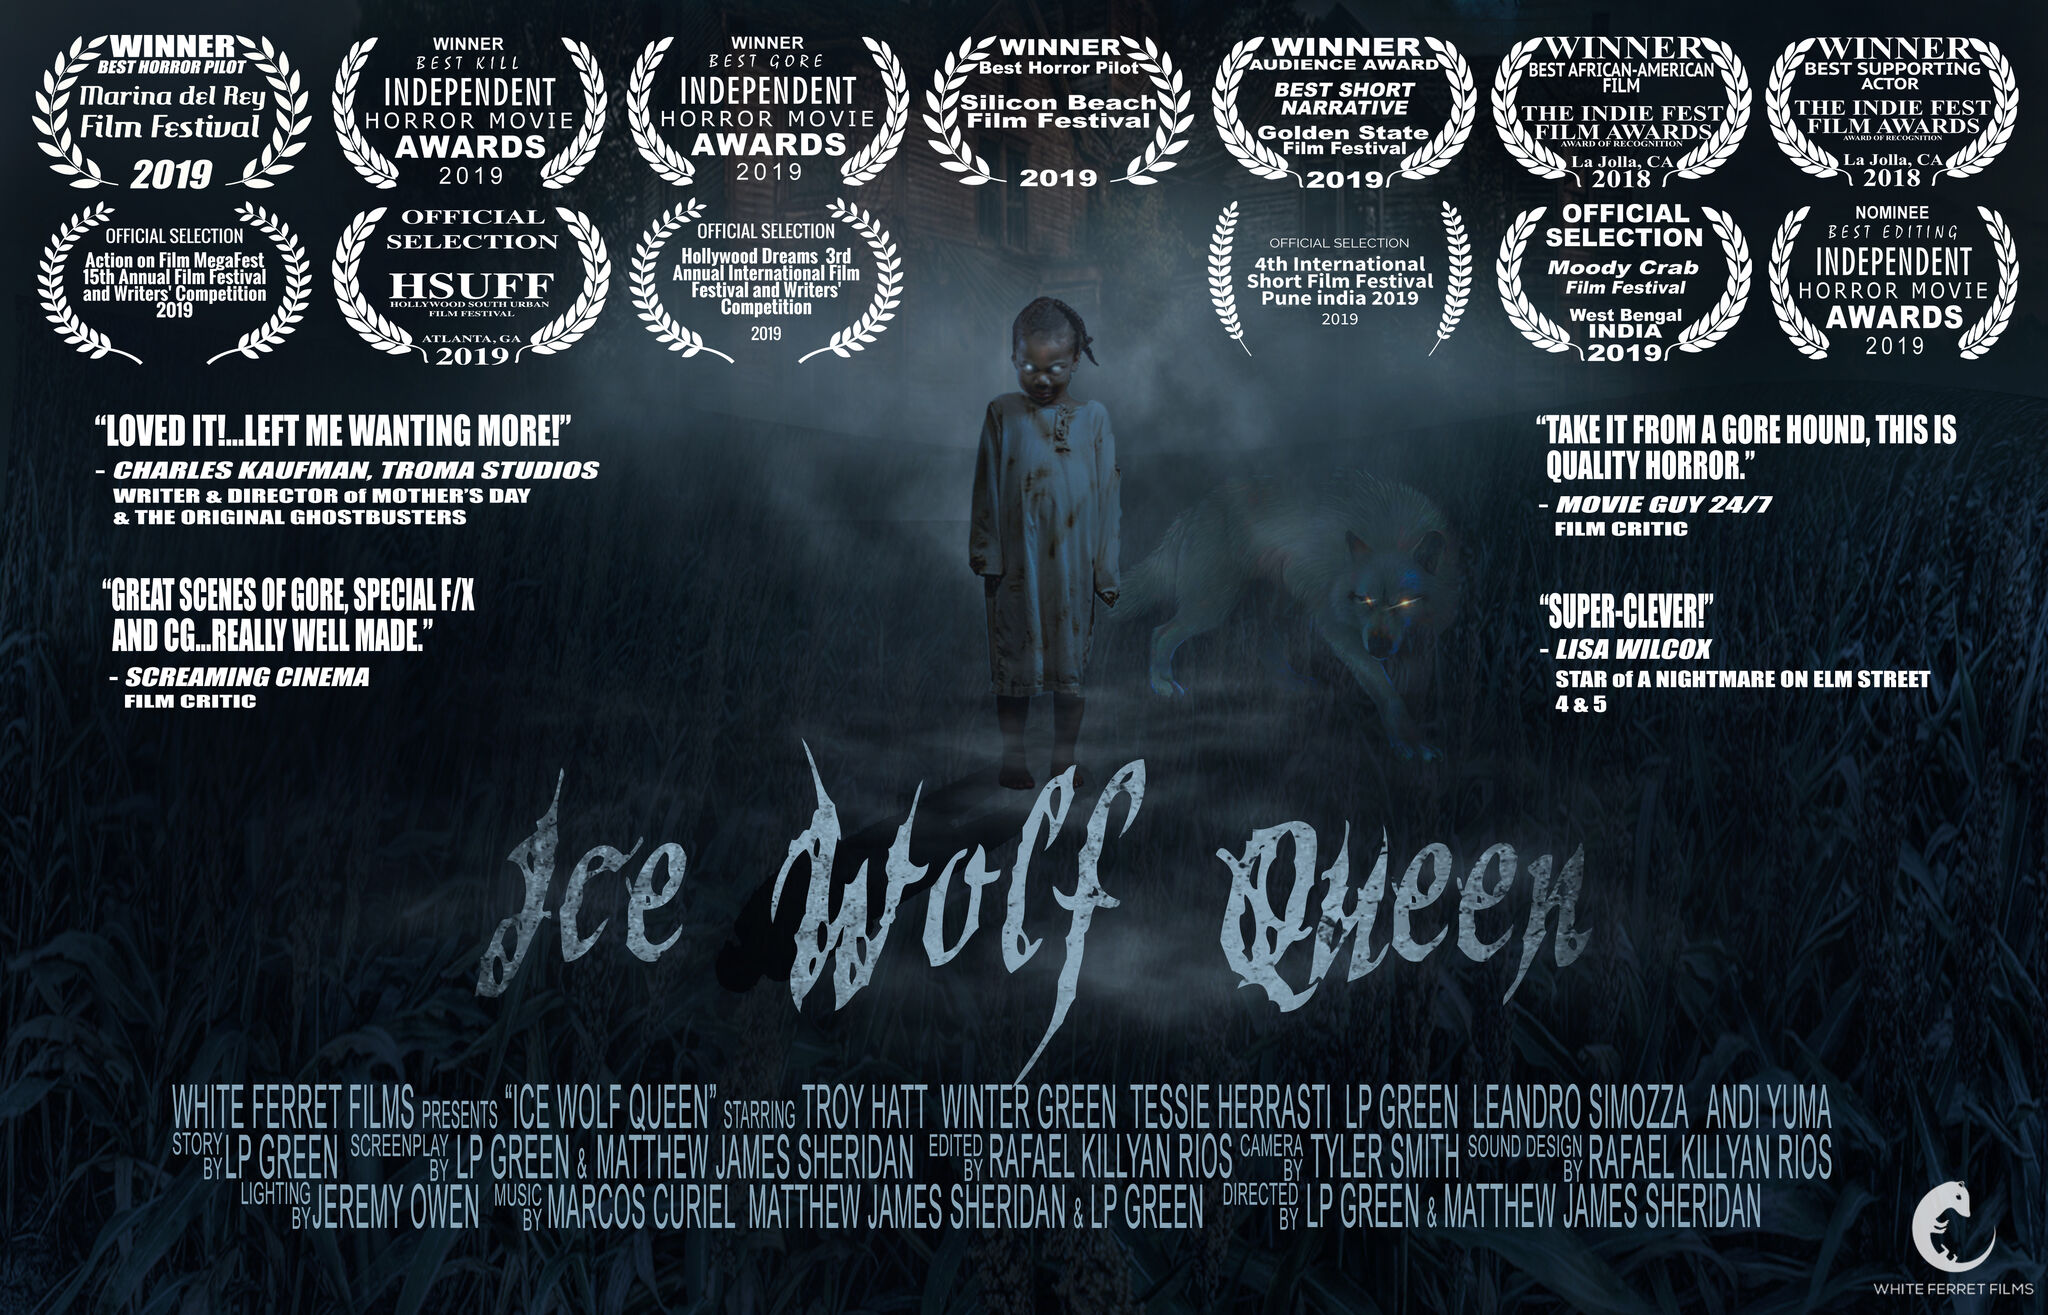 THE ICE WOLF QUEEN - A FILM BY LP GREEN AND MATTHEW JAMES SHERIDAN